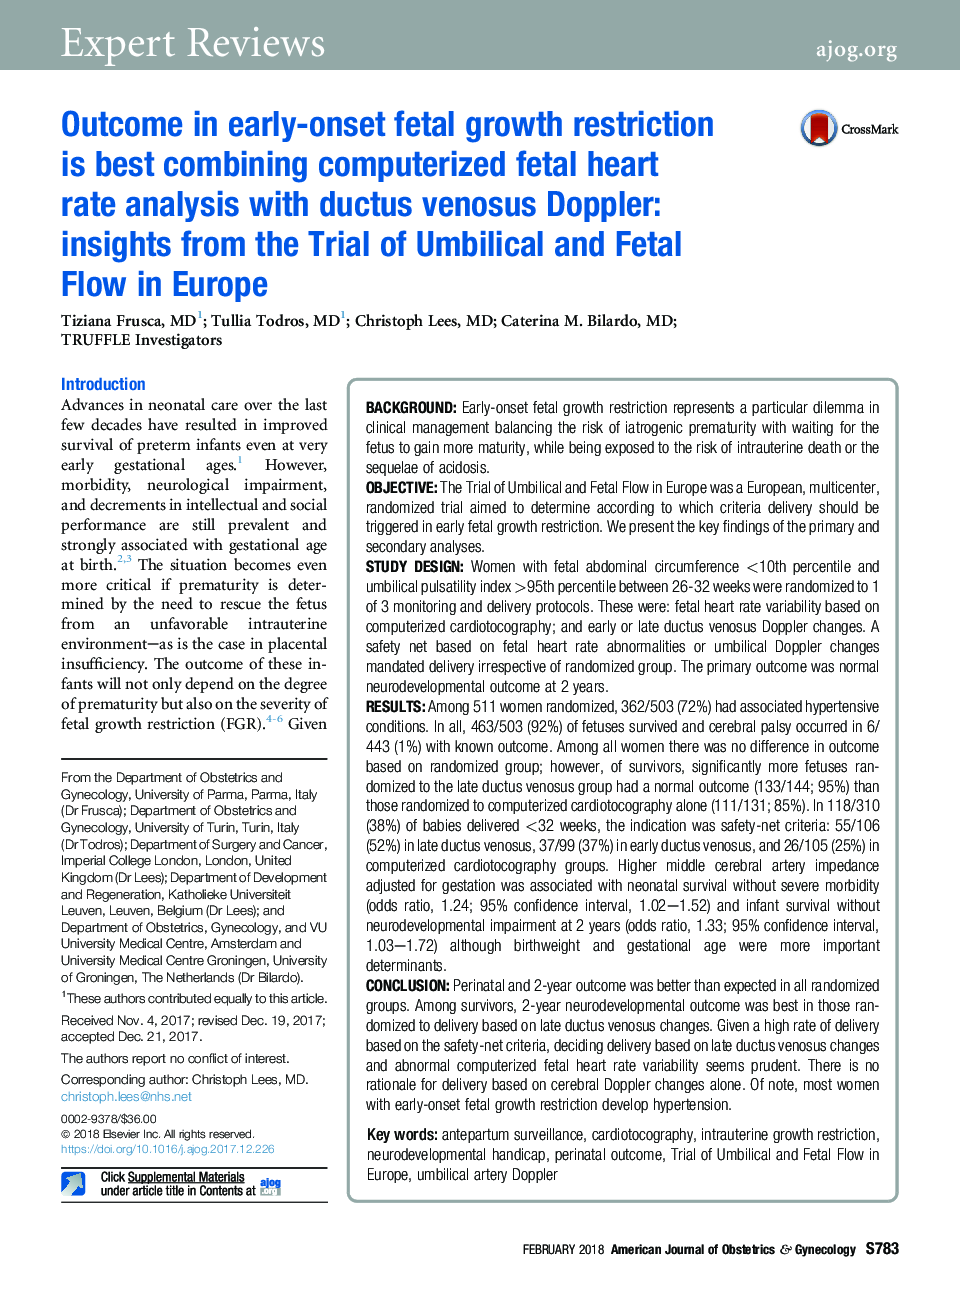 Outcome in early-onset fetal growth restriction isÂ best combining computerized fetal heart rate analysis with ductus venosus Doppler: insights from the Trial of Umbilical and Fetal Flow in Europe